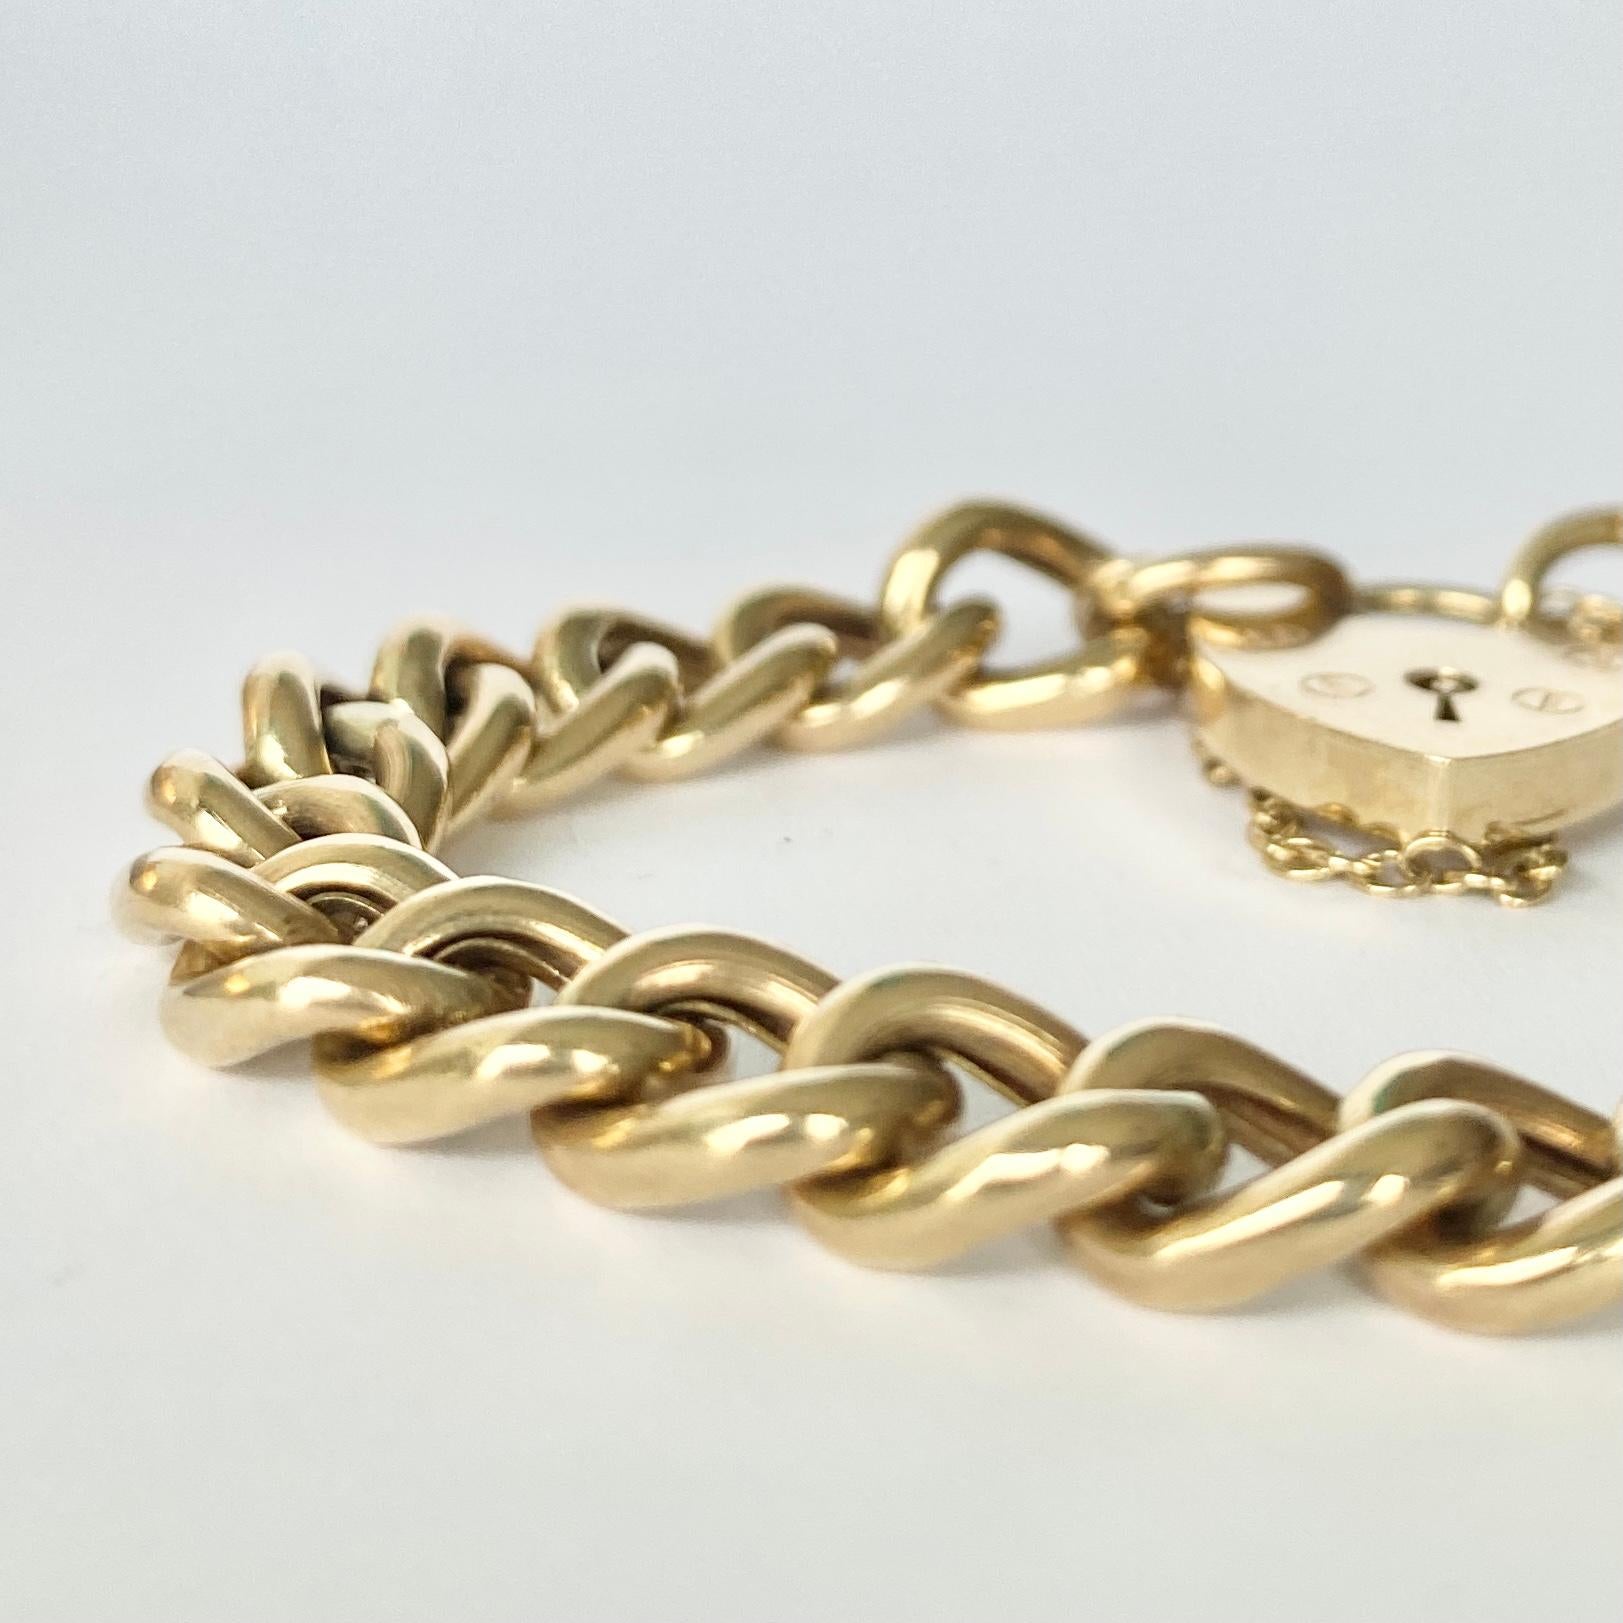 This is a classic curb bracelet modelled in 9ct yellow gold and has a heart padlock as the method of fastening. Fully hallmarked London 1978.

Length: 16cm 
Chain Width: 6.5mm

Weight: 10g